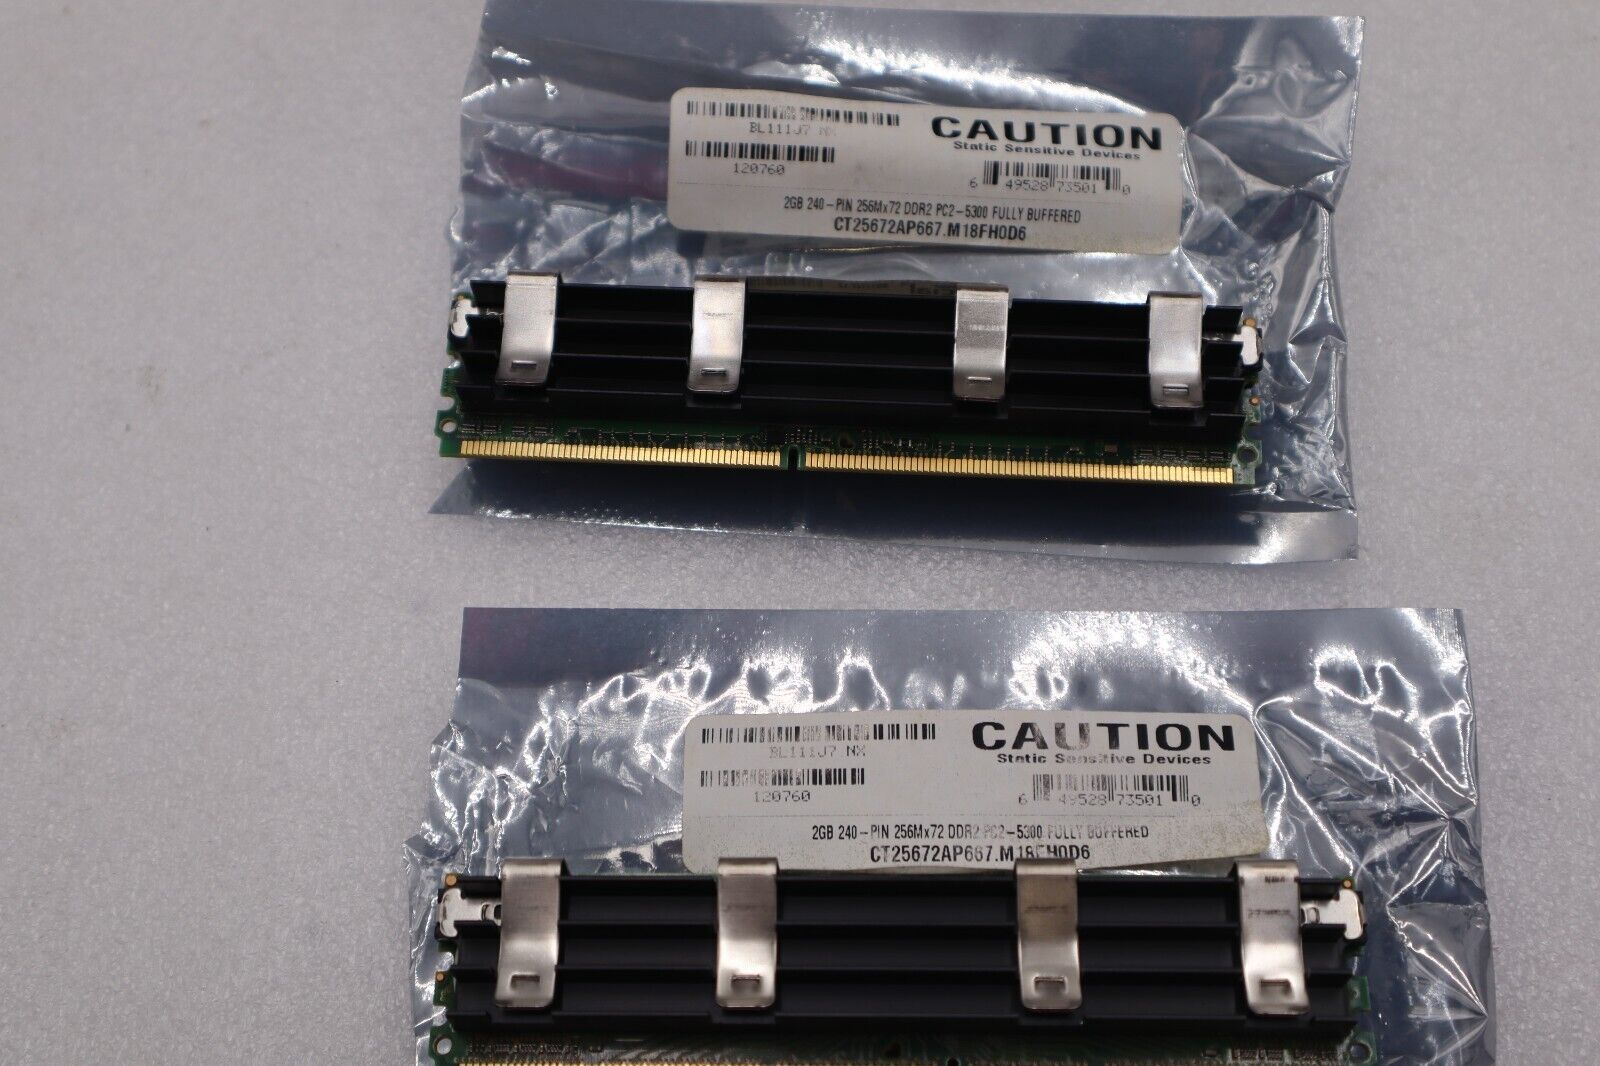 CRUCIAL PC2-5300 1GB DDR2 FULLY BUFFERED STOCK #K-1522A